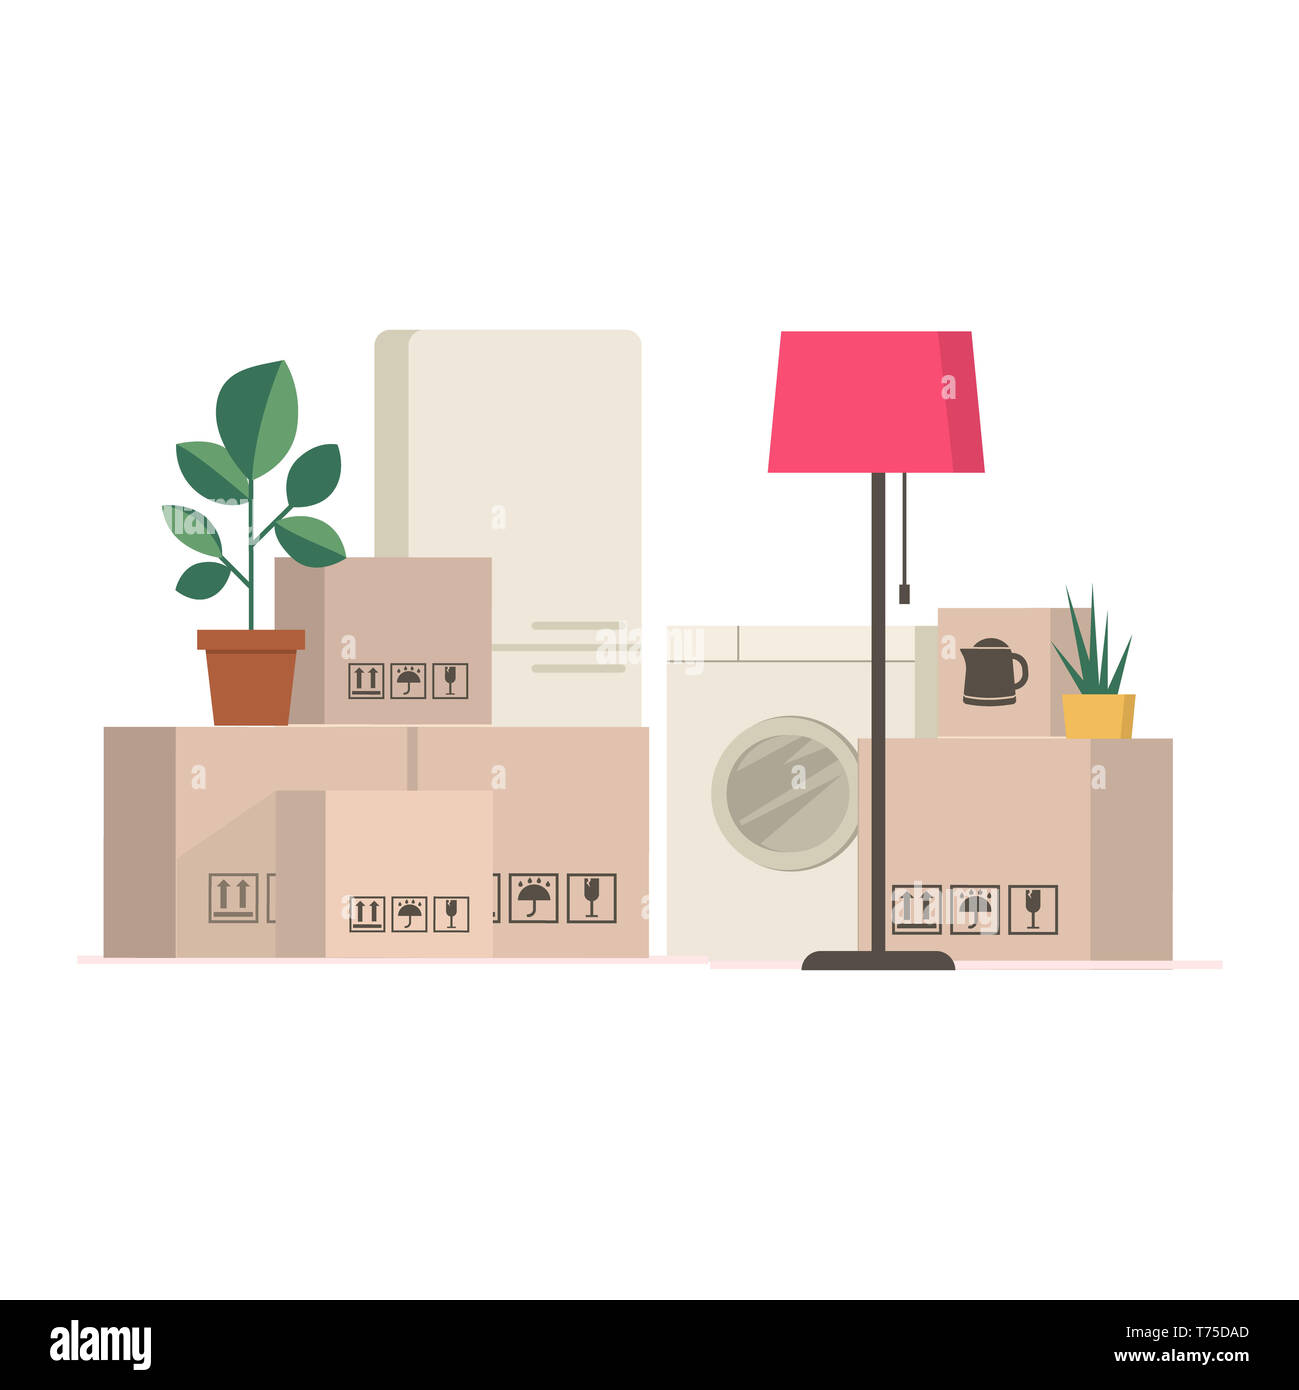 Cardboard boxes and packed household stuff - moving to a new house or office. Stock Photo